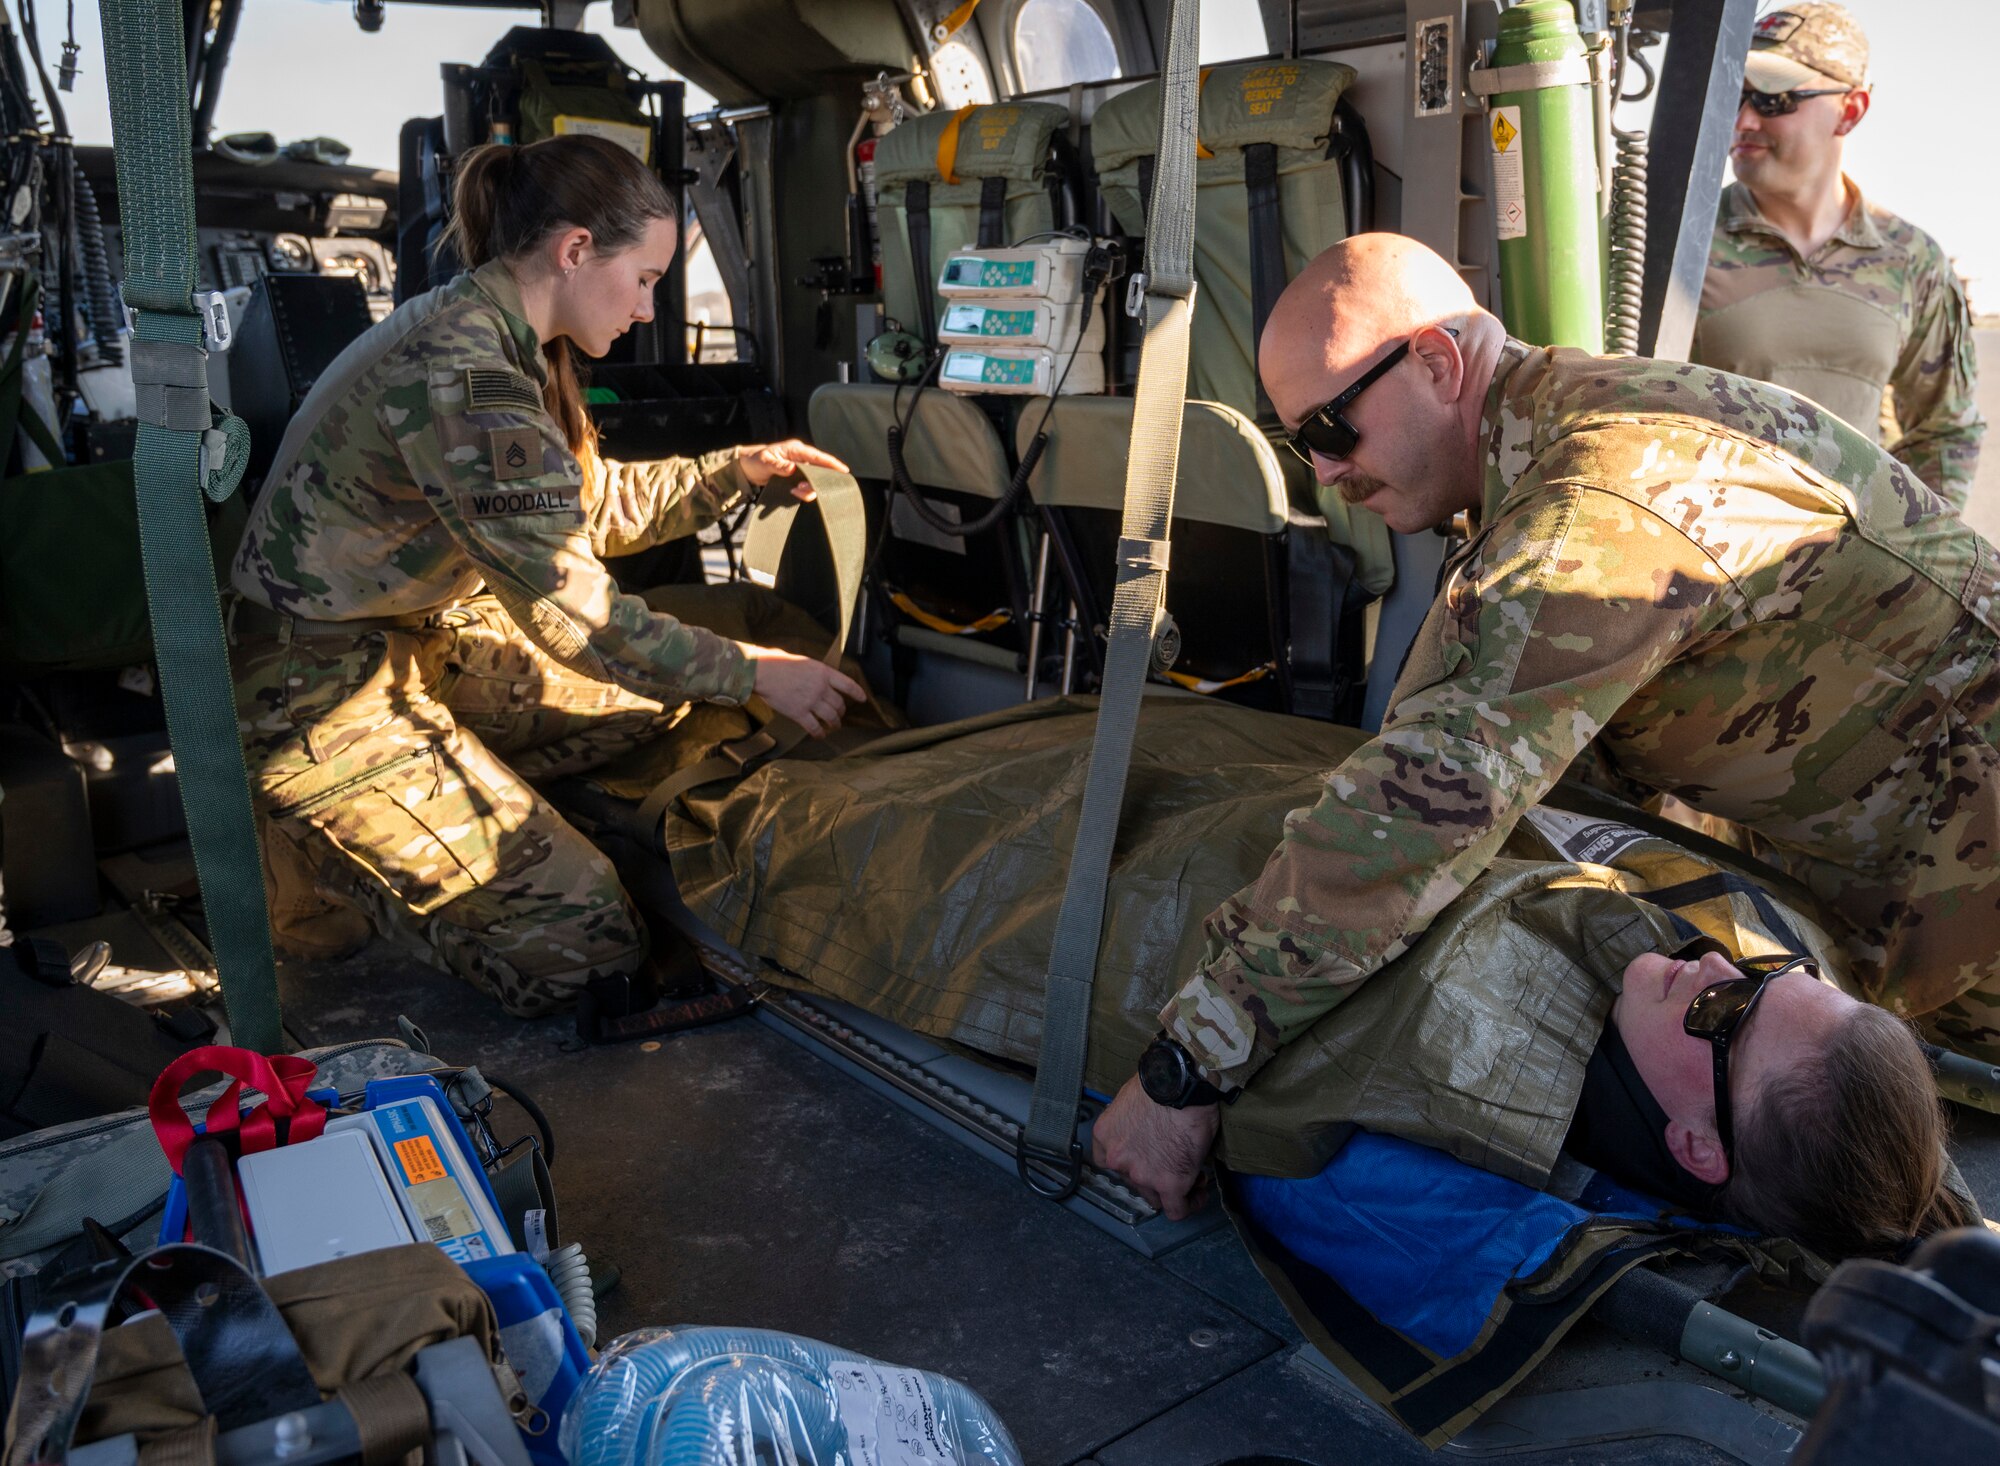 U.S. Army Soldiers practice strapping down a patient in the cabin of a UH-60 Blackhawk helicopter at Ali Al Salem Air Base, Kuwait, Jan. 20, 2023.